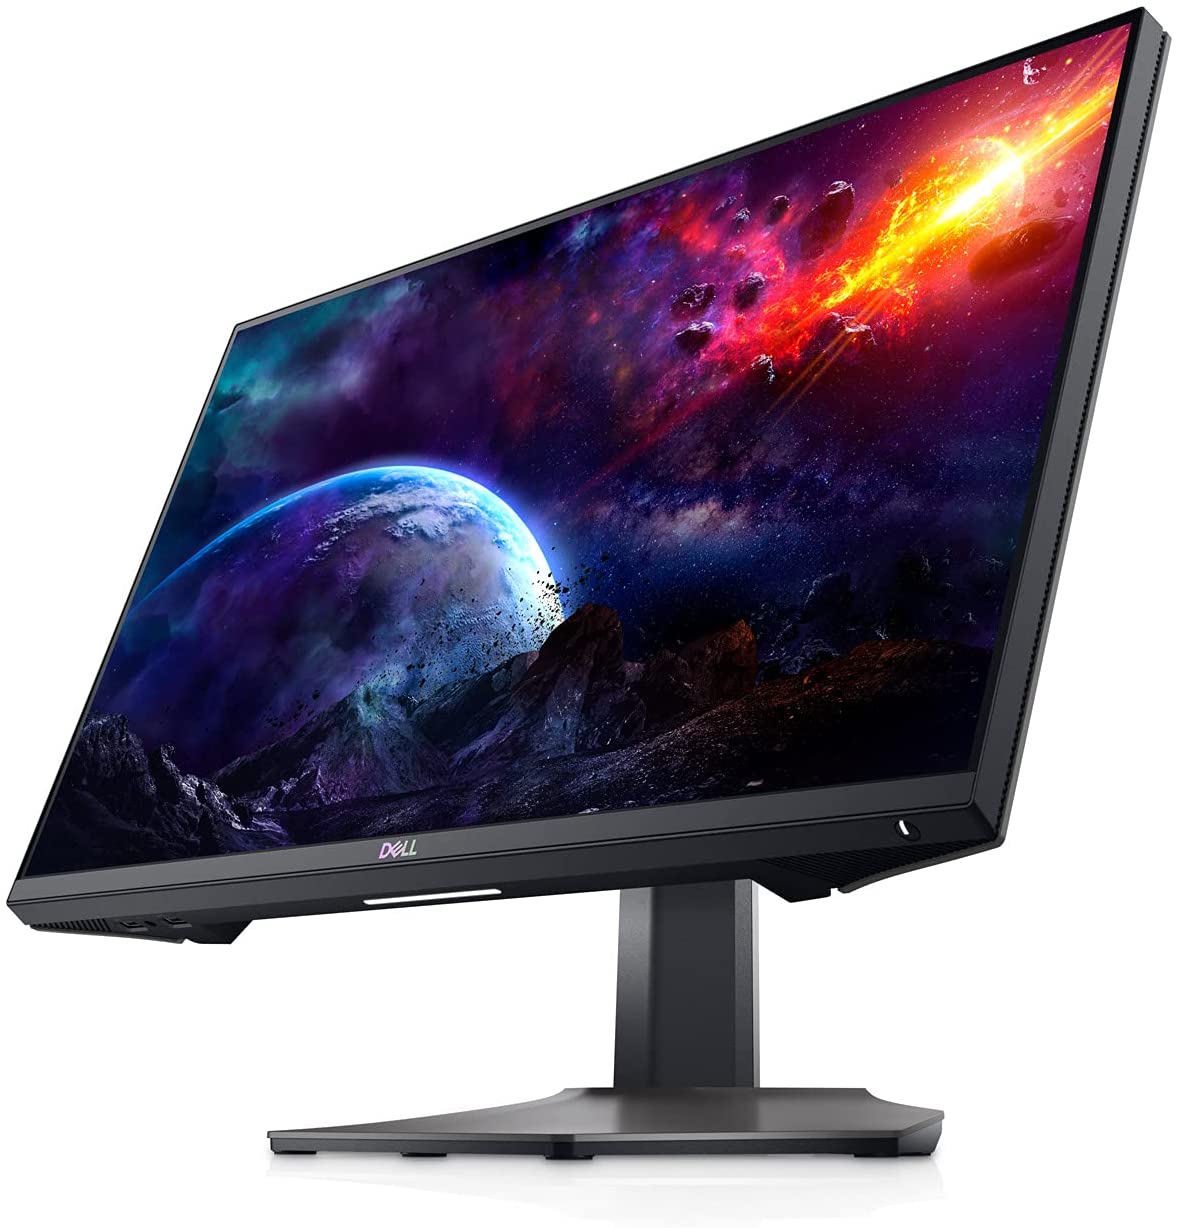 DELL S2522HG 24.5 inch Full HD IPS 240Hz Gaming Monitor User Guide